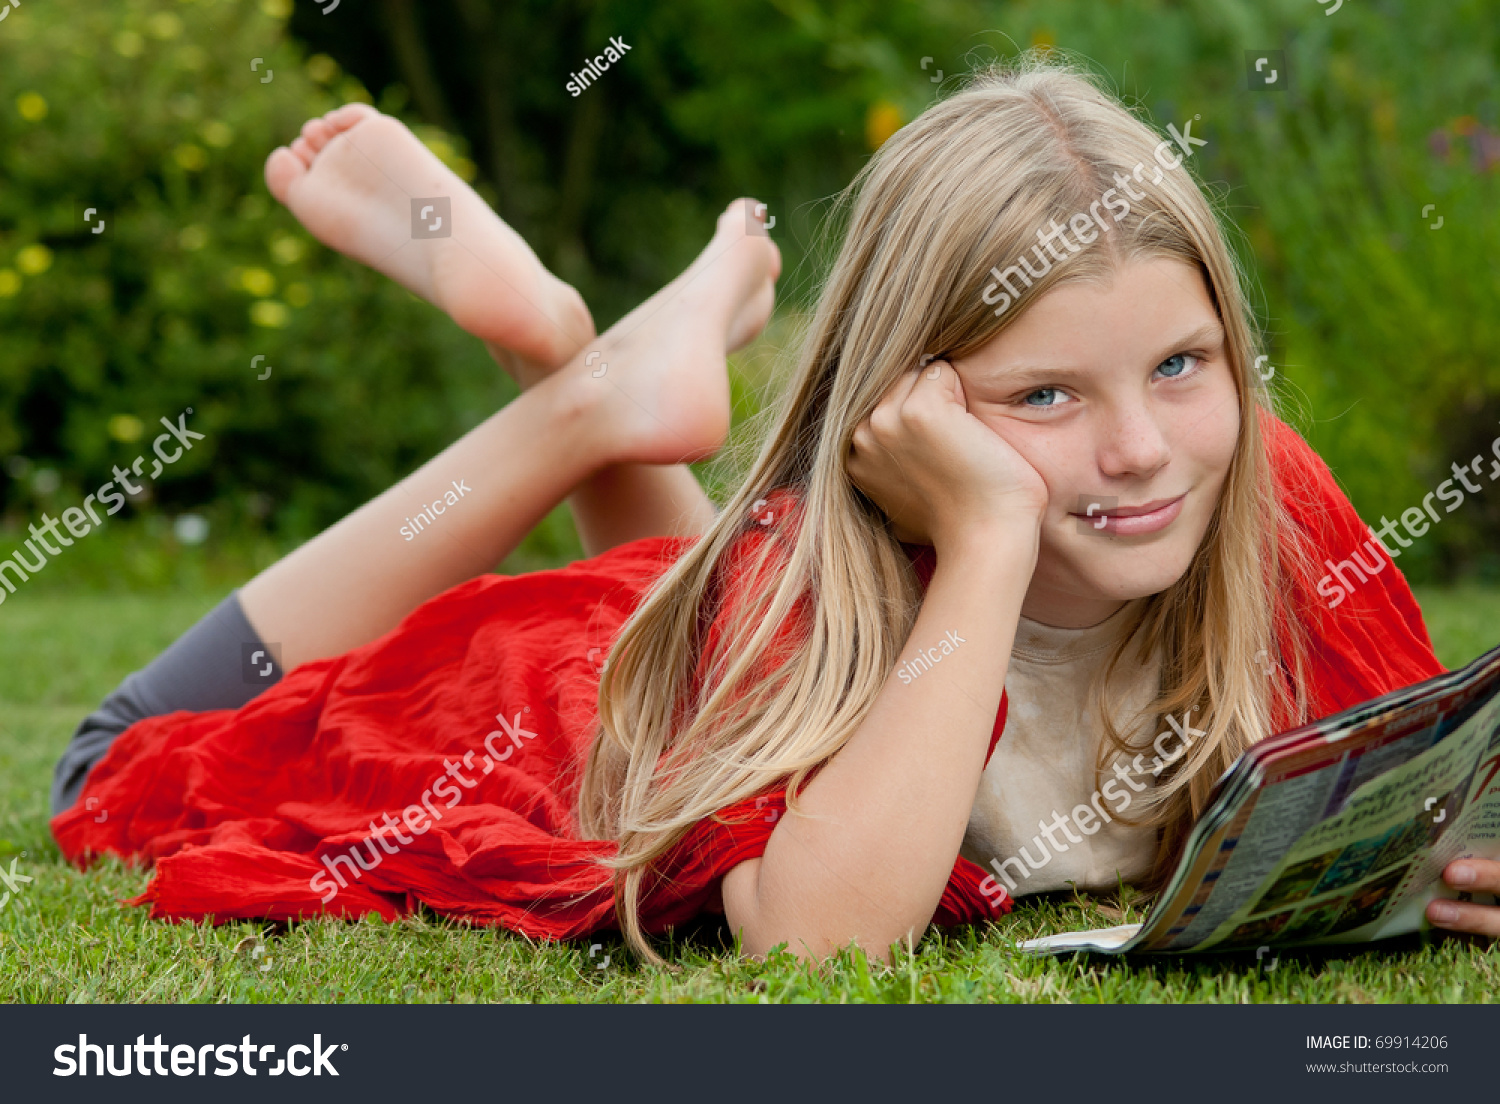 https://image.shutterstock.com/shutterstock/photos/69914206/display_1500/stock-photo-young-blond-blue-eyed-teenage-girl-lying-on-the-grass-on-the-garden-and-reading-a-teen-magazine-69914206.jpg